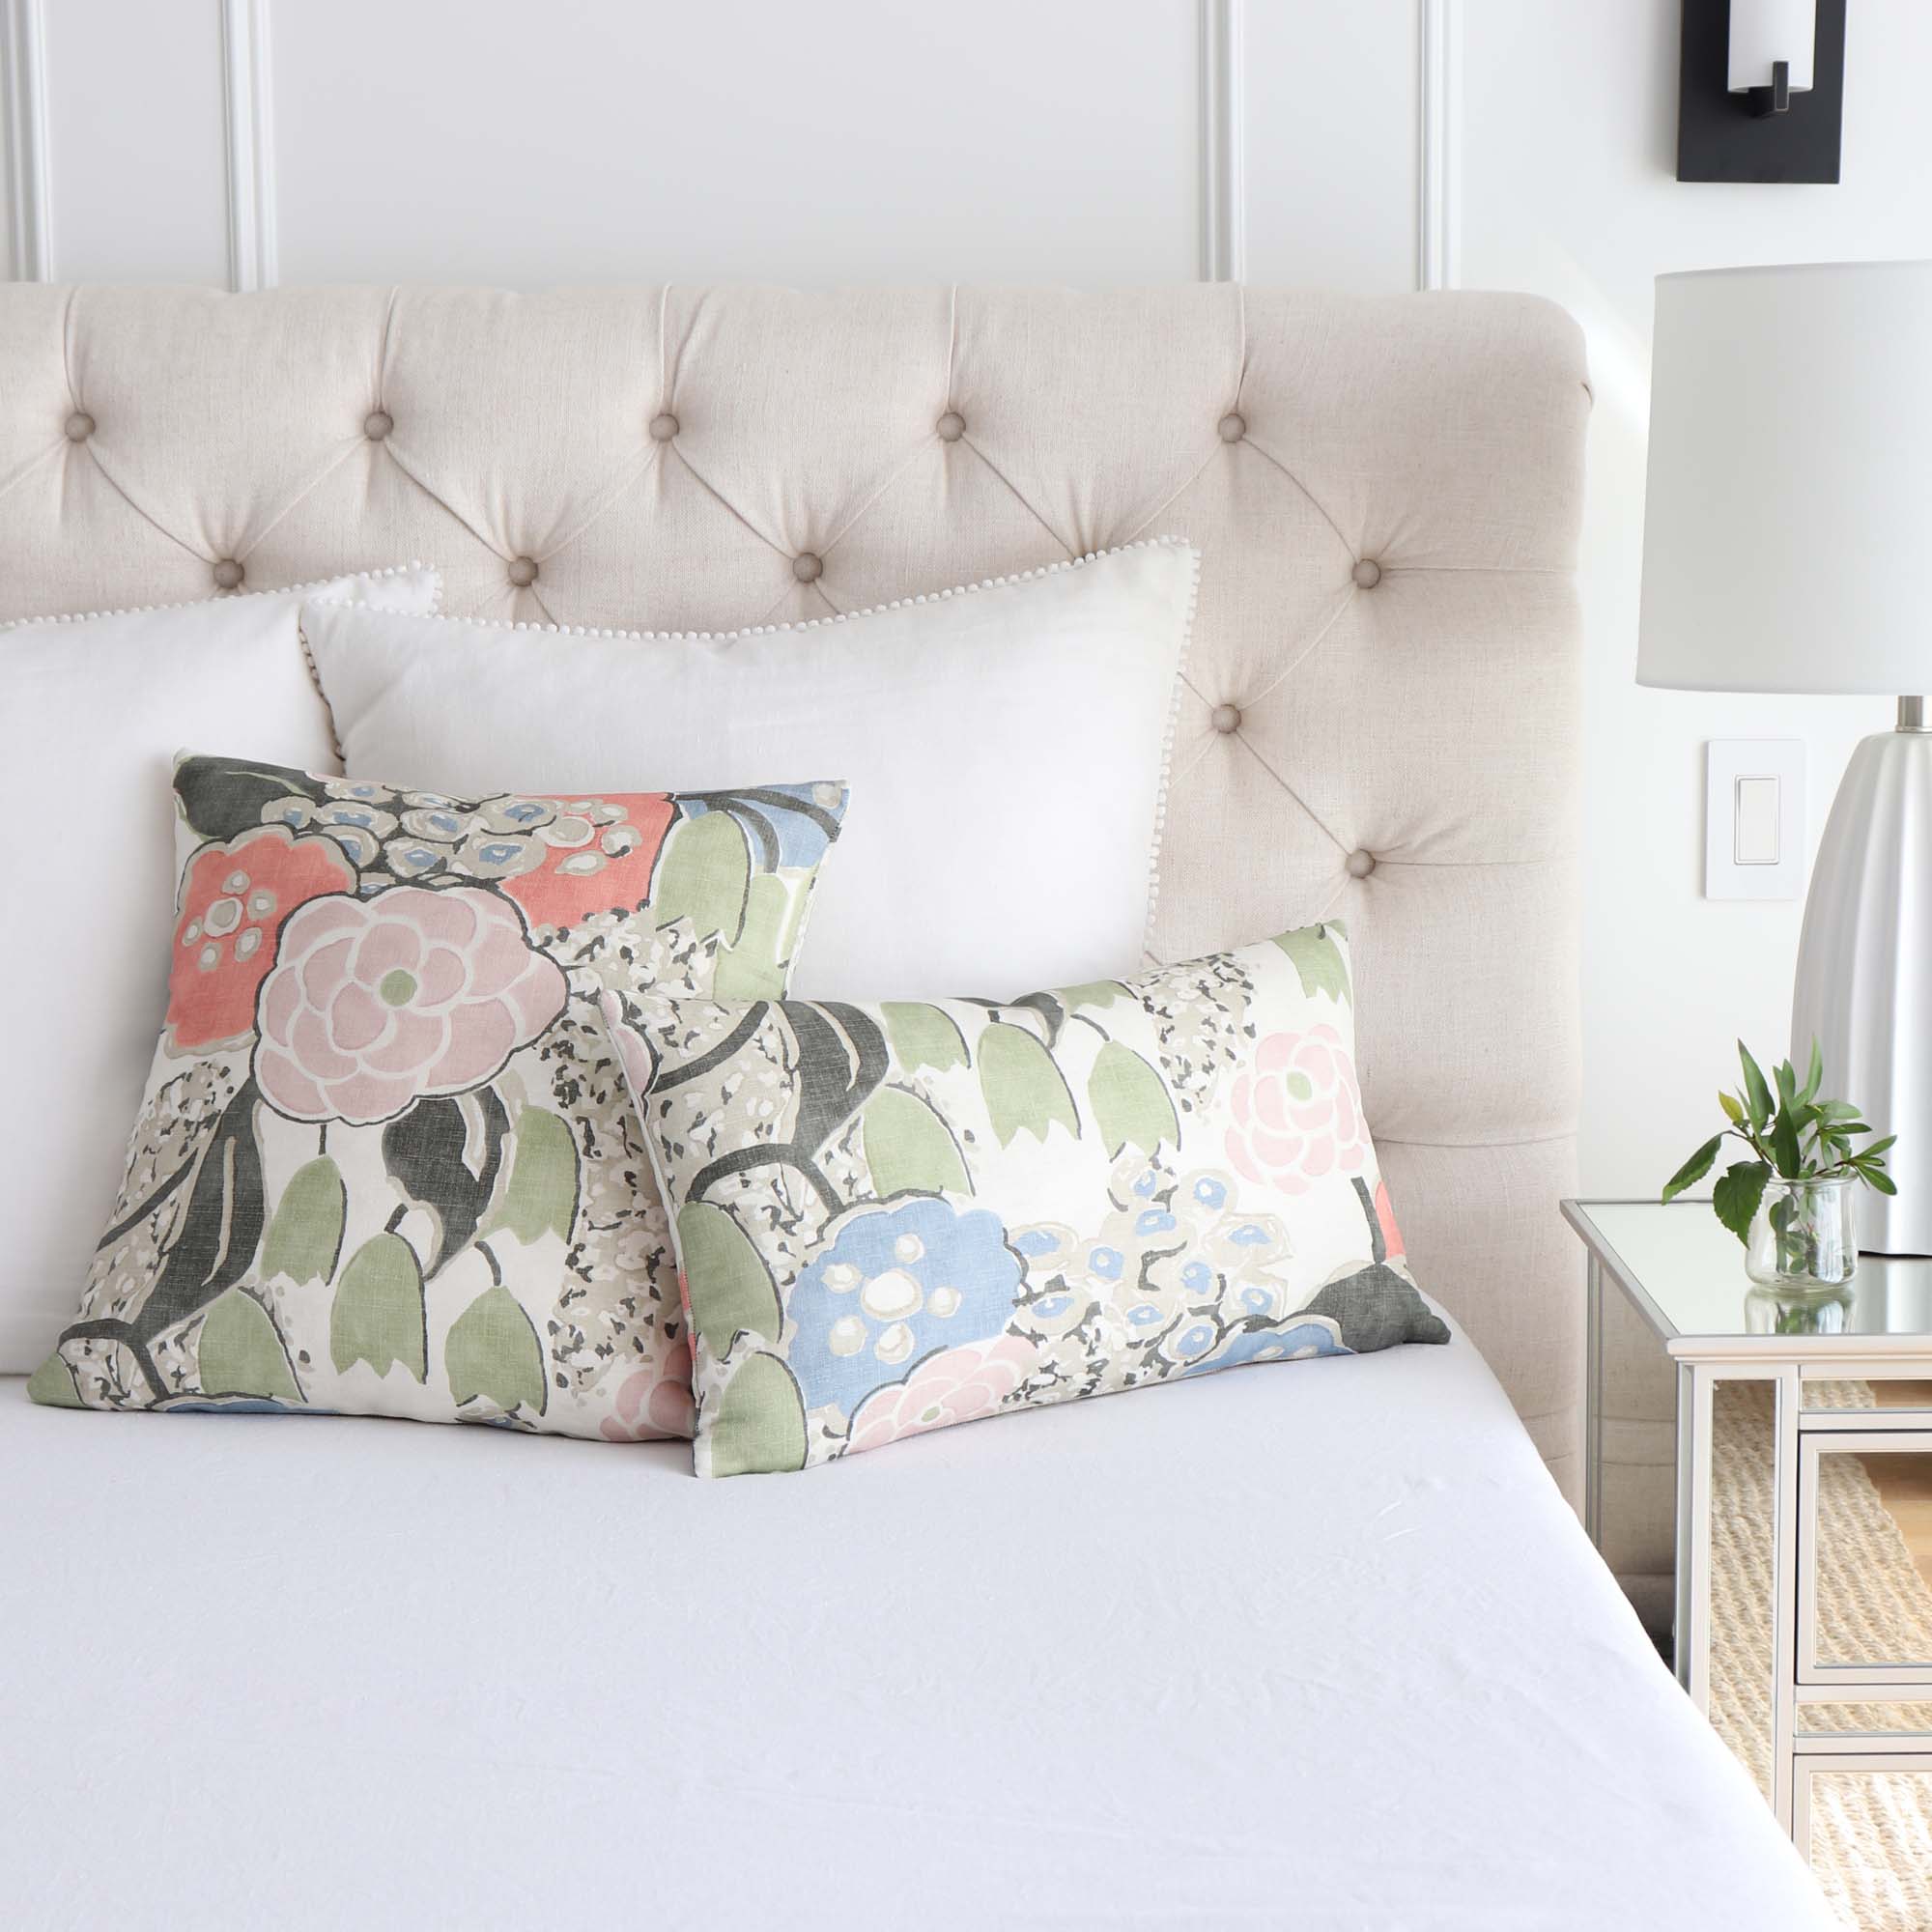 White bed linen with green cushions & bedhead  Green bedding bedroom, Bedroom  cushions, White linen bedding